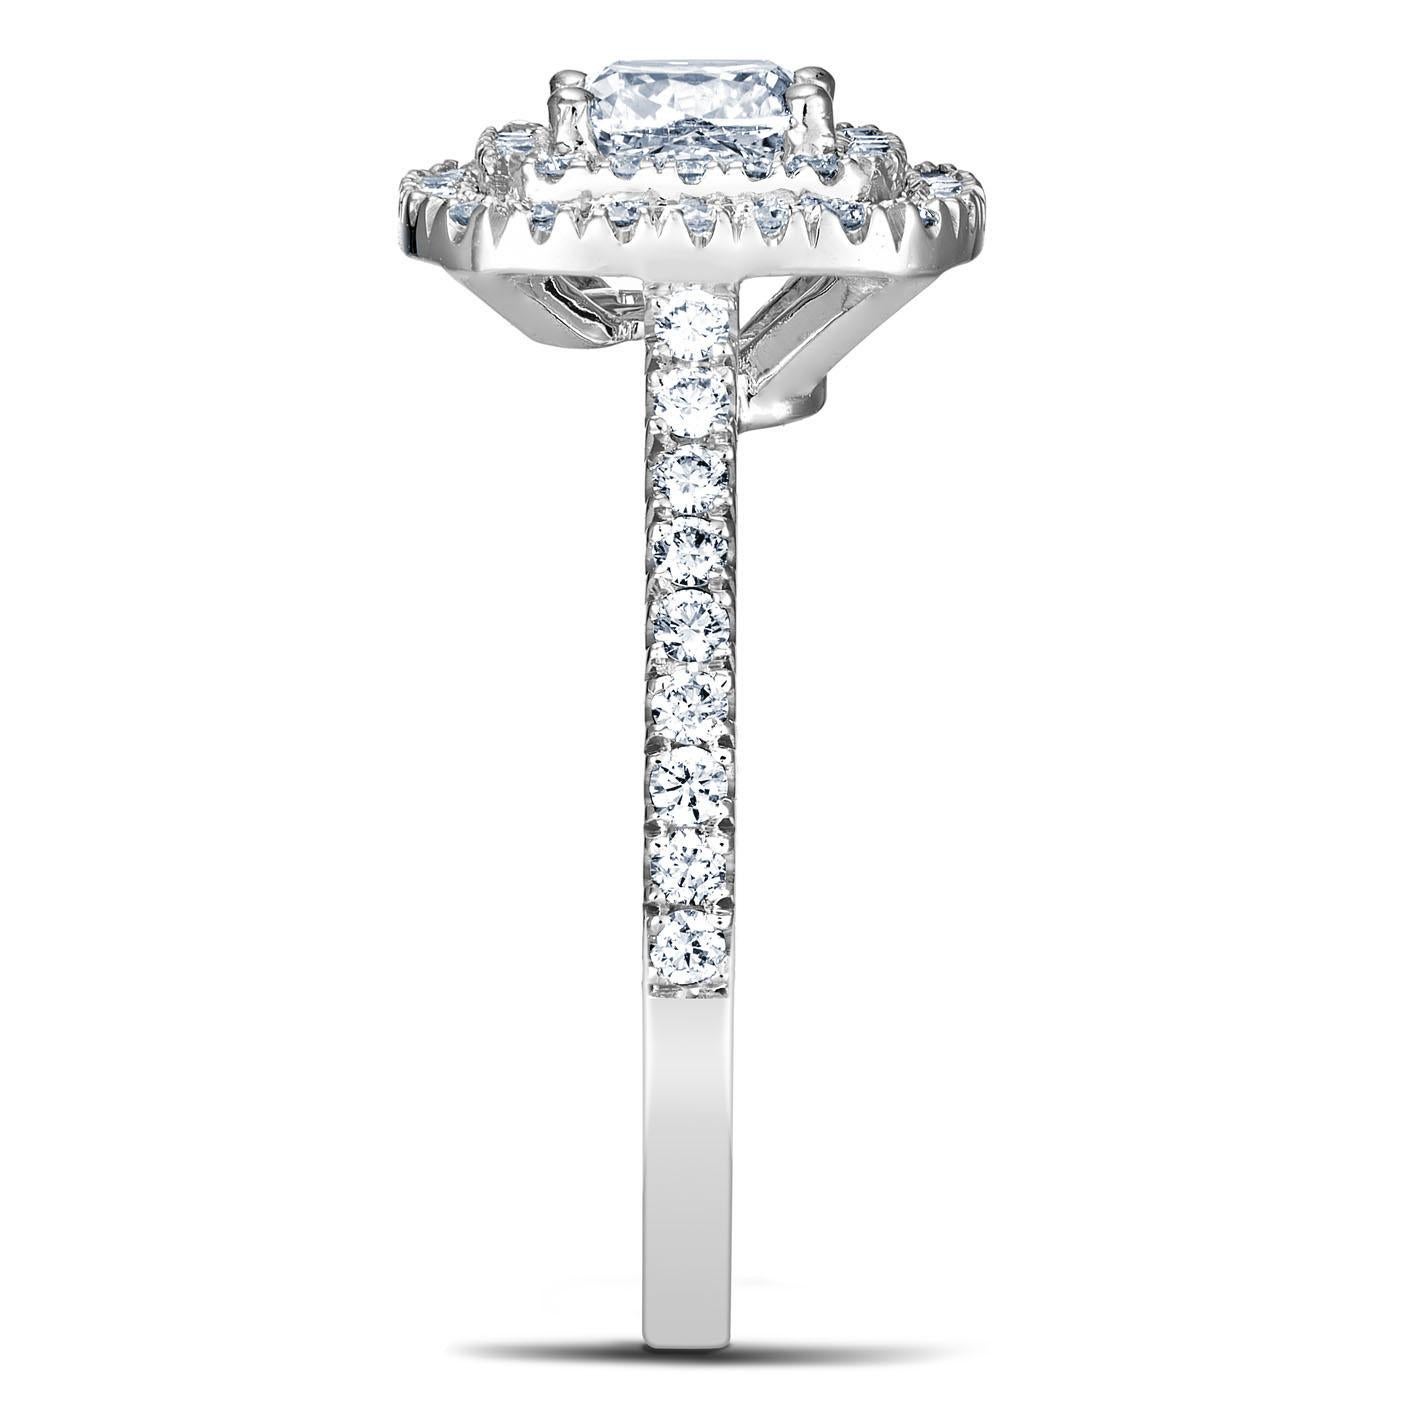 For Sale:  Art Deco Style 18k White Gold 0.70 Ct Diamond Ring GIA Certified with 0.55 Cts 3